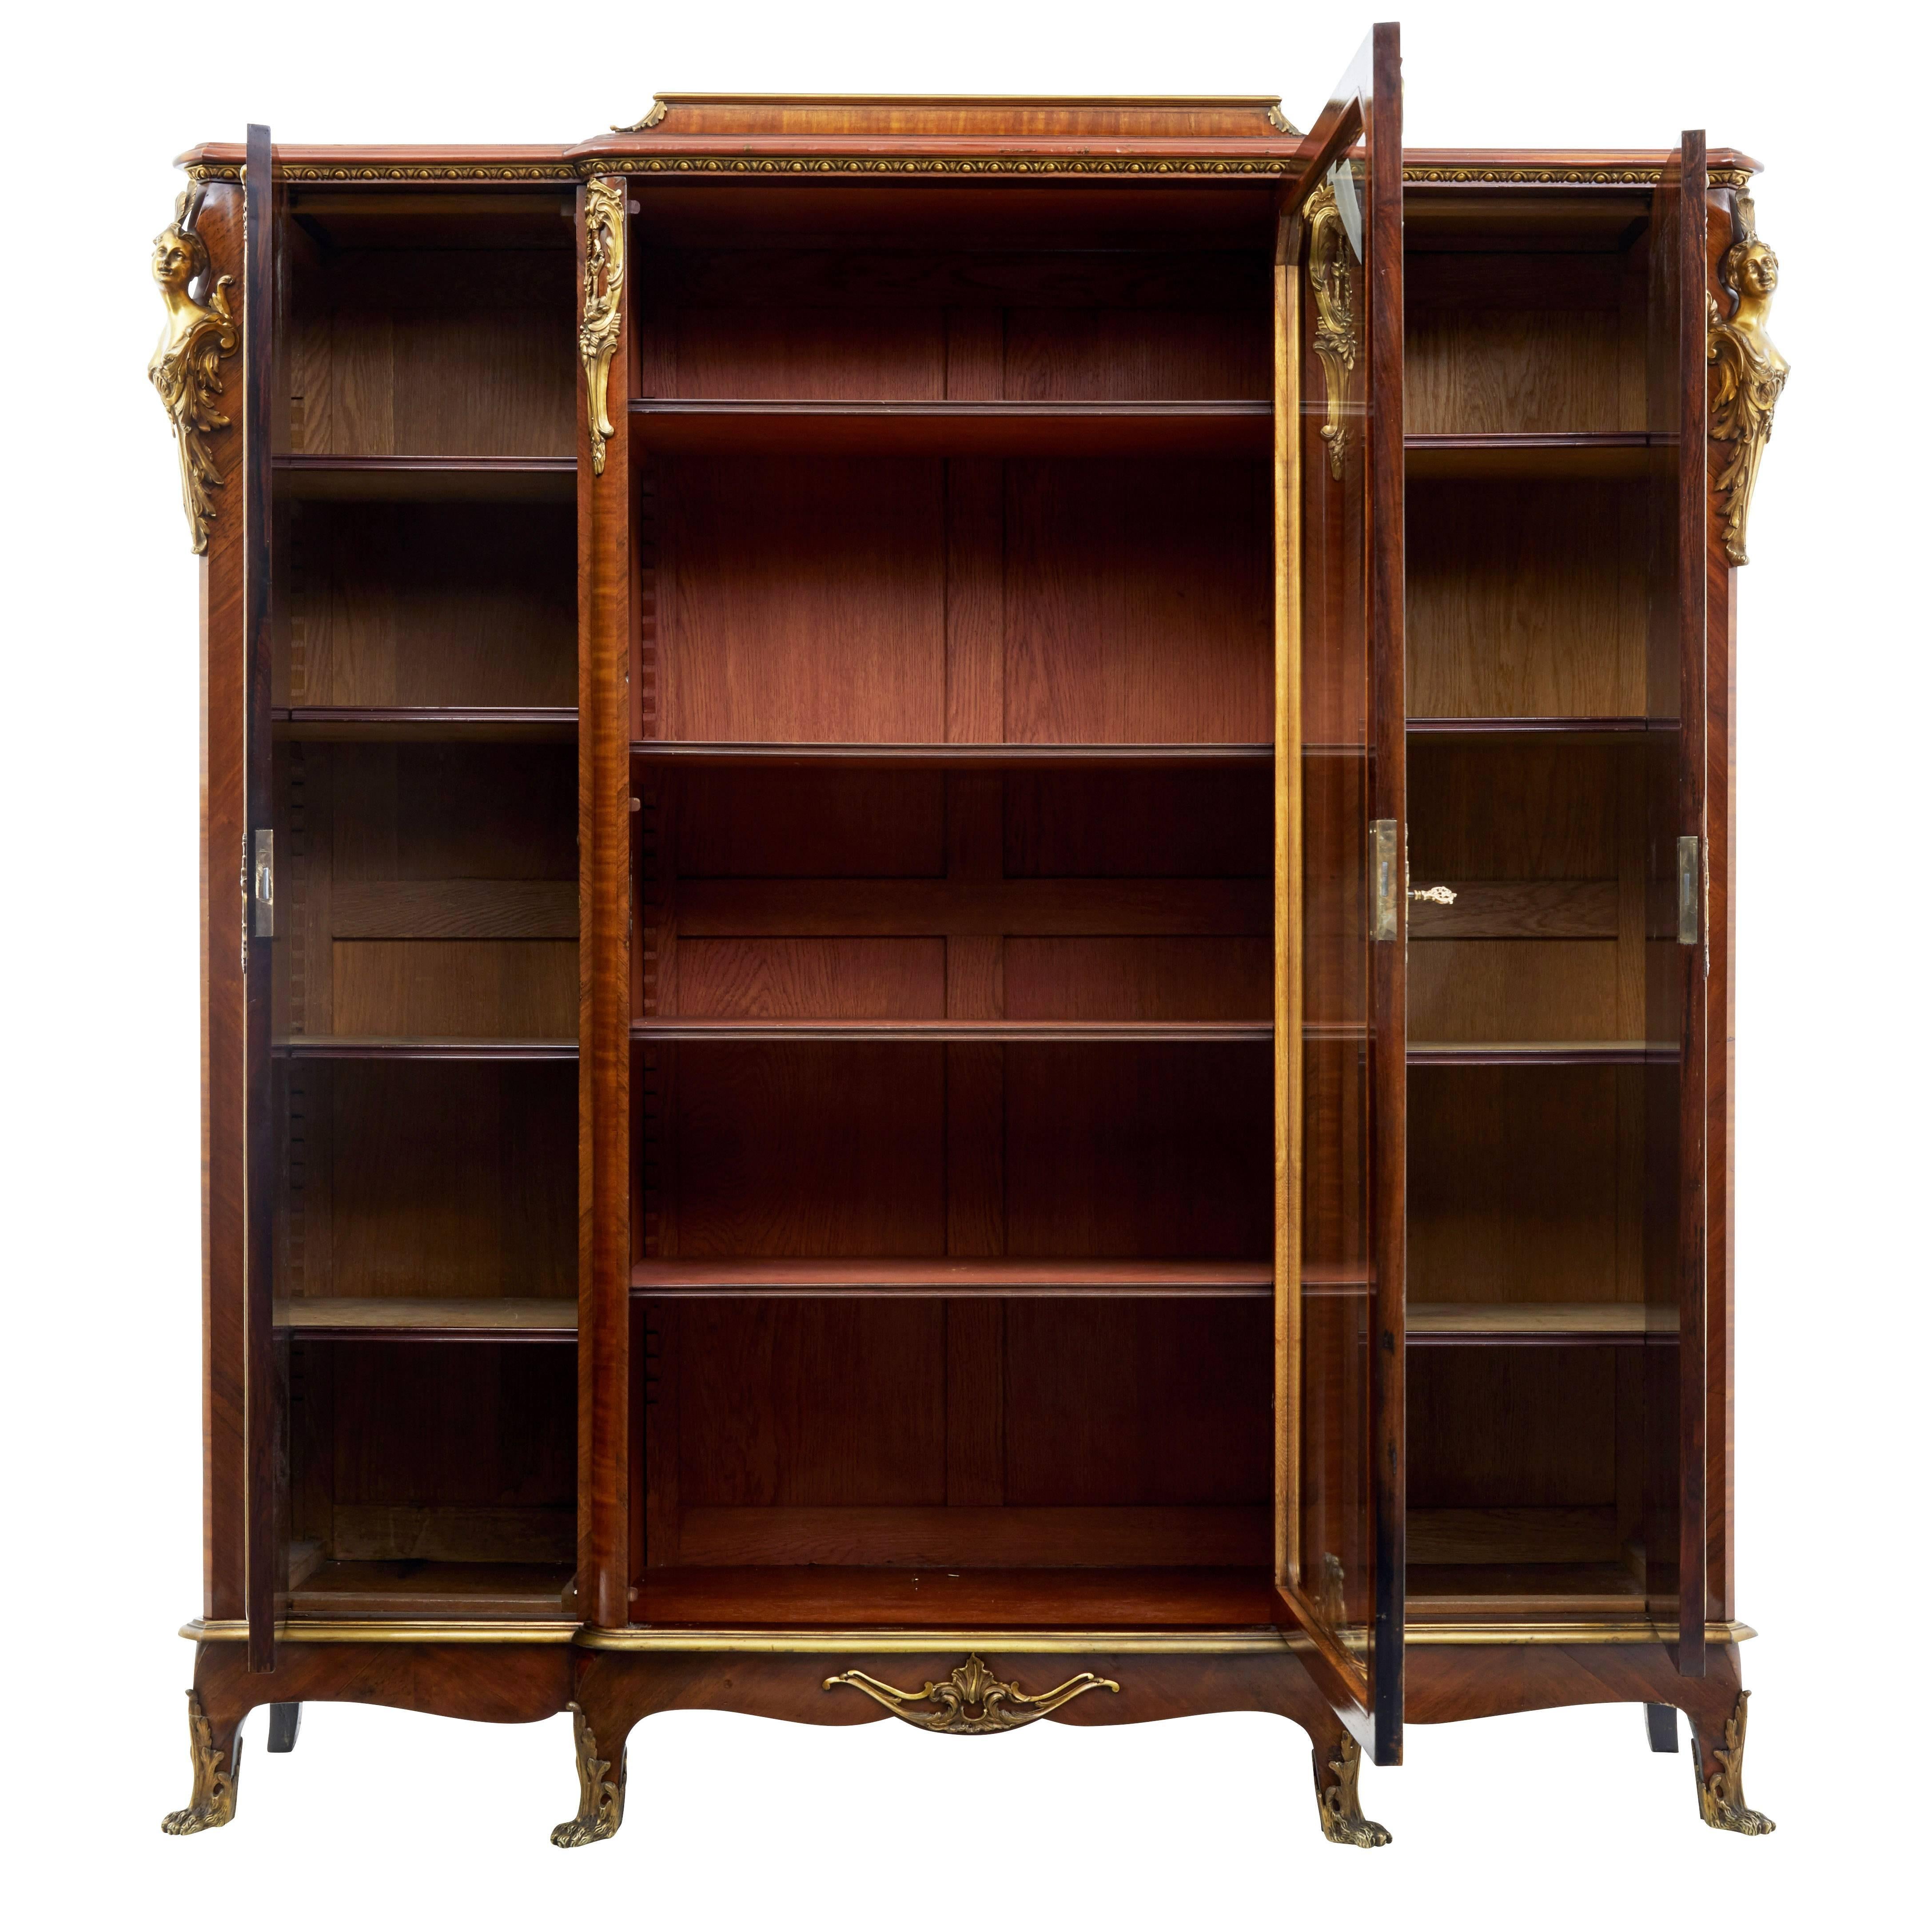 Beautiful quality French rosewood and kingwood, circa 1895.

Break fronted cabinet adorned with no expense spared ormolu mounts, main features being the shells and swags to the doors and the female busts inset into the front corners.

Front